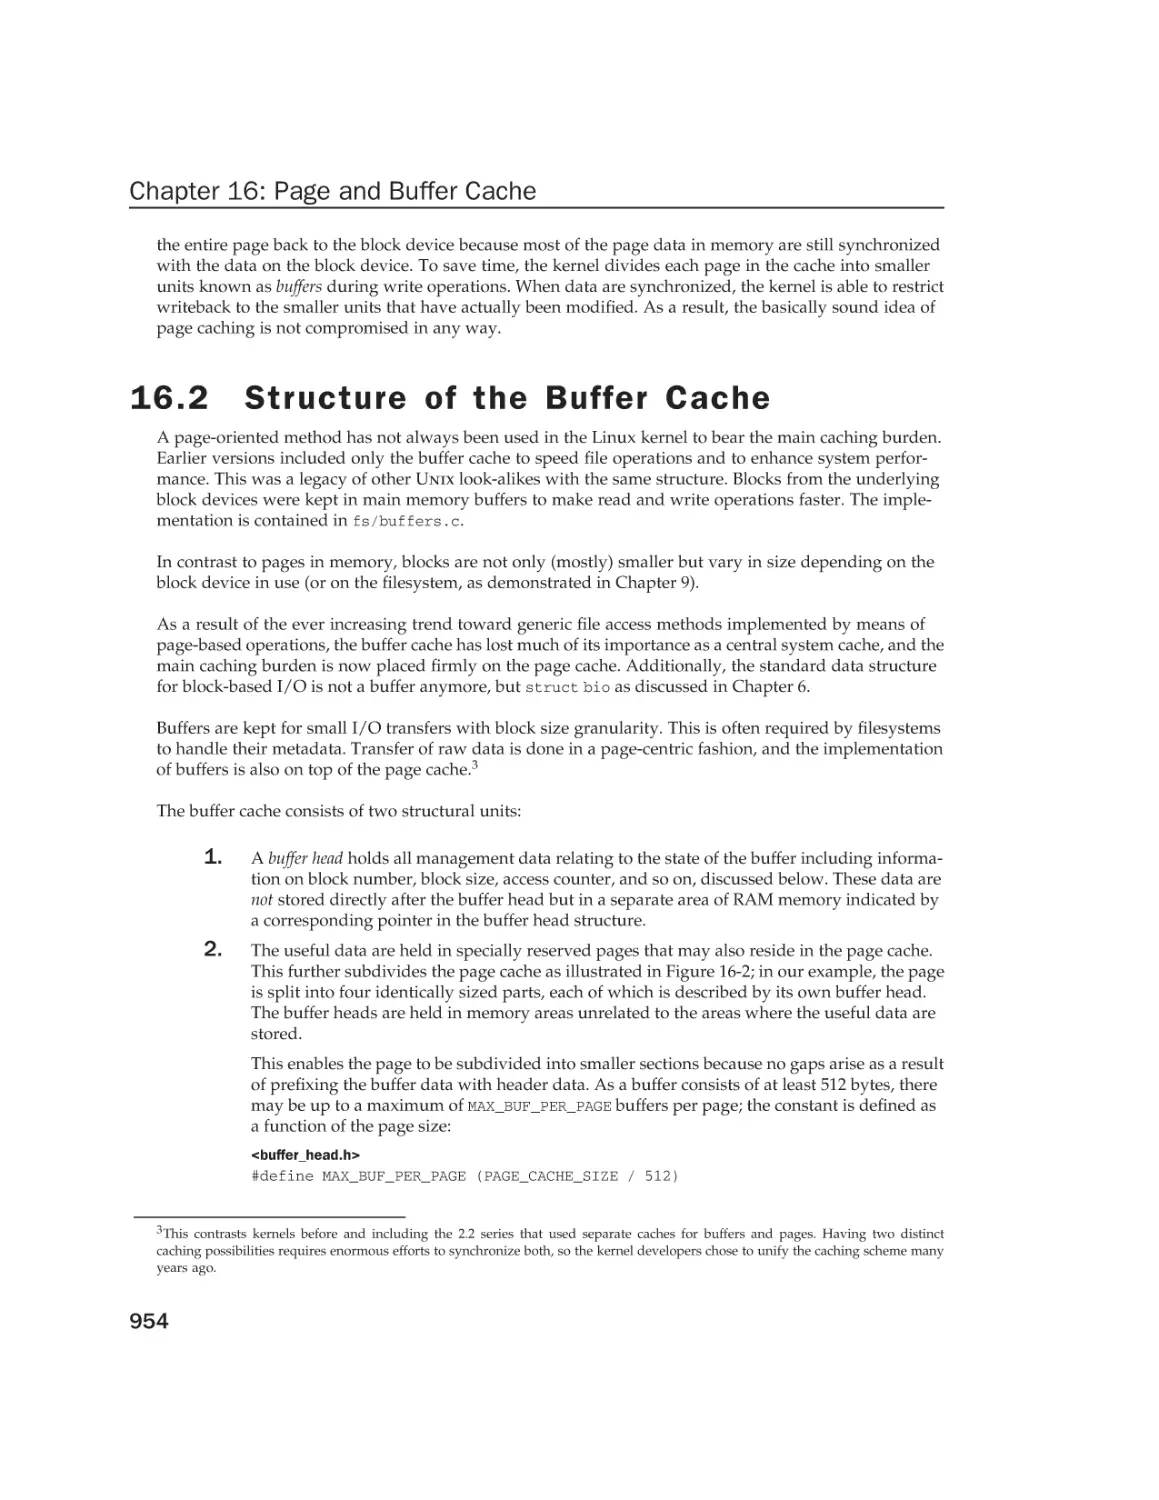 16.2 Structure of the Buffer Cache